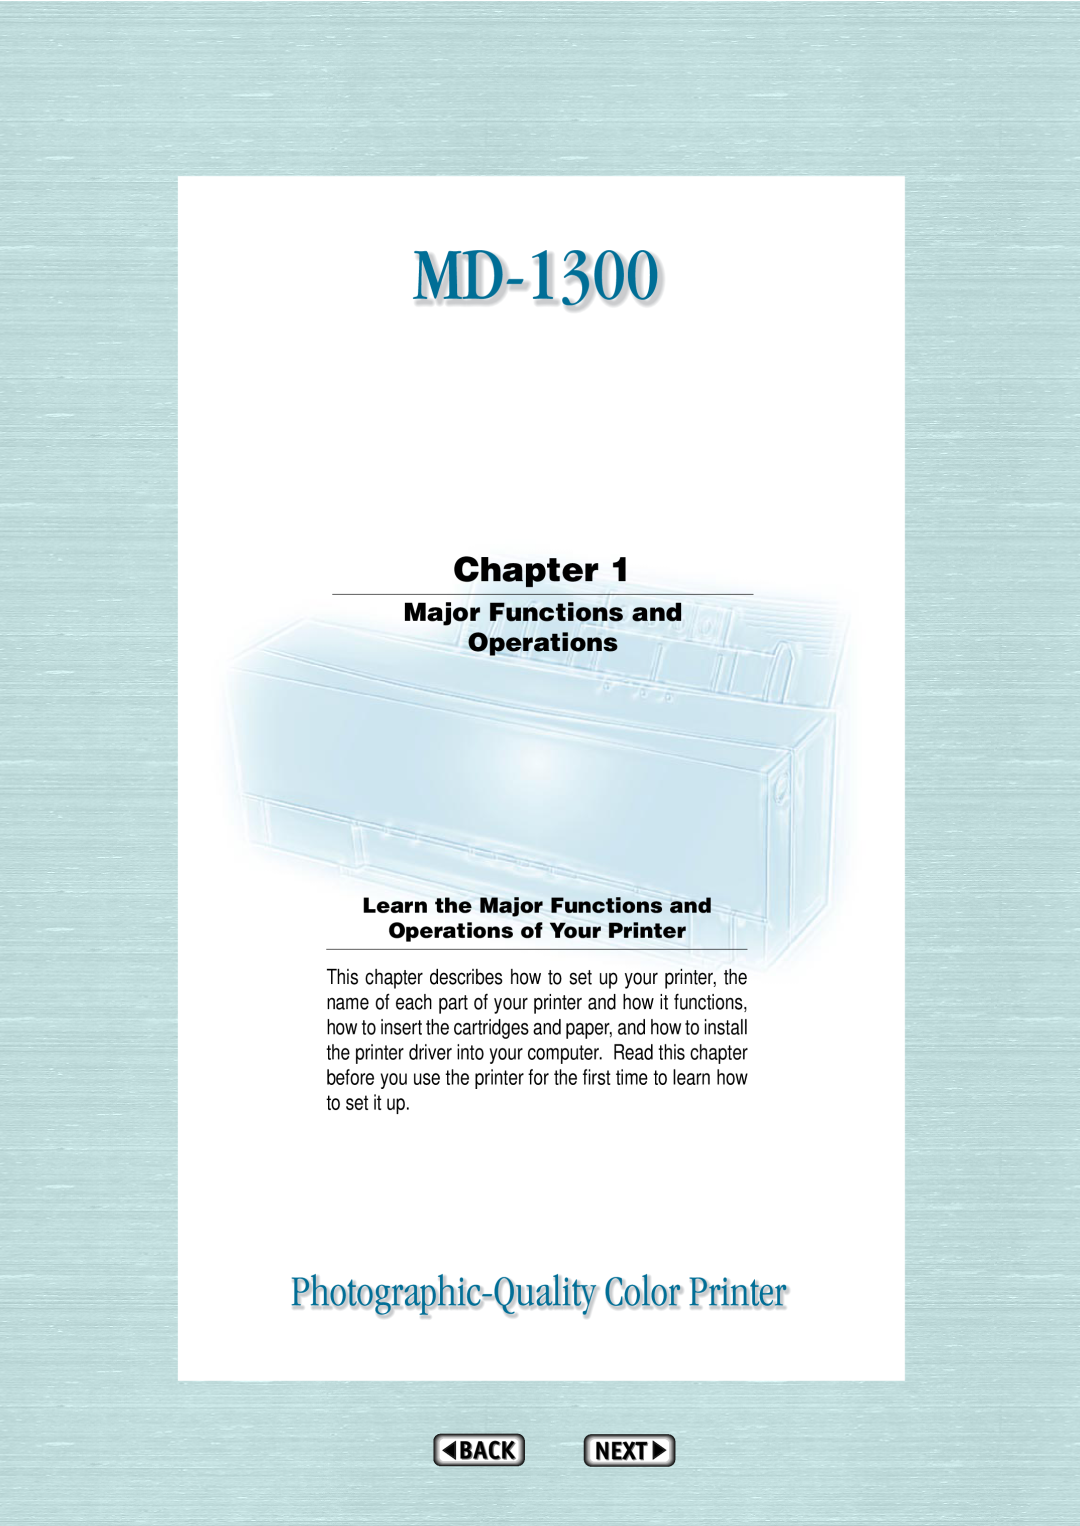 Alps Electric MD-1300 manual Chapter, Major Functions and Operations 